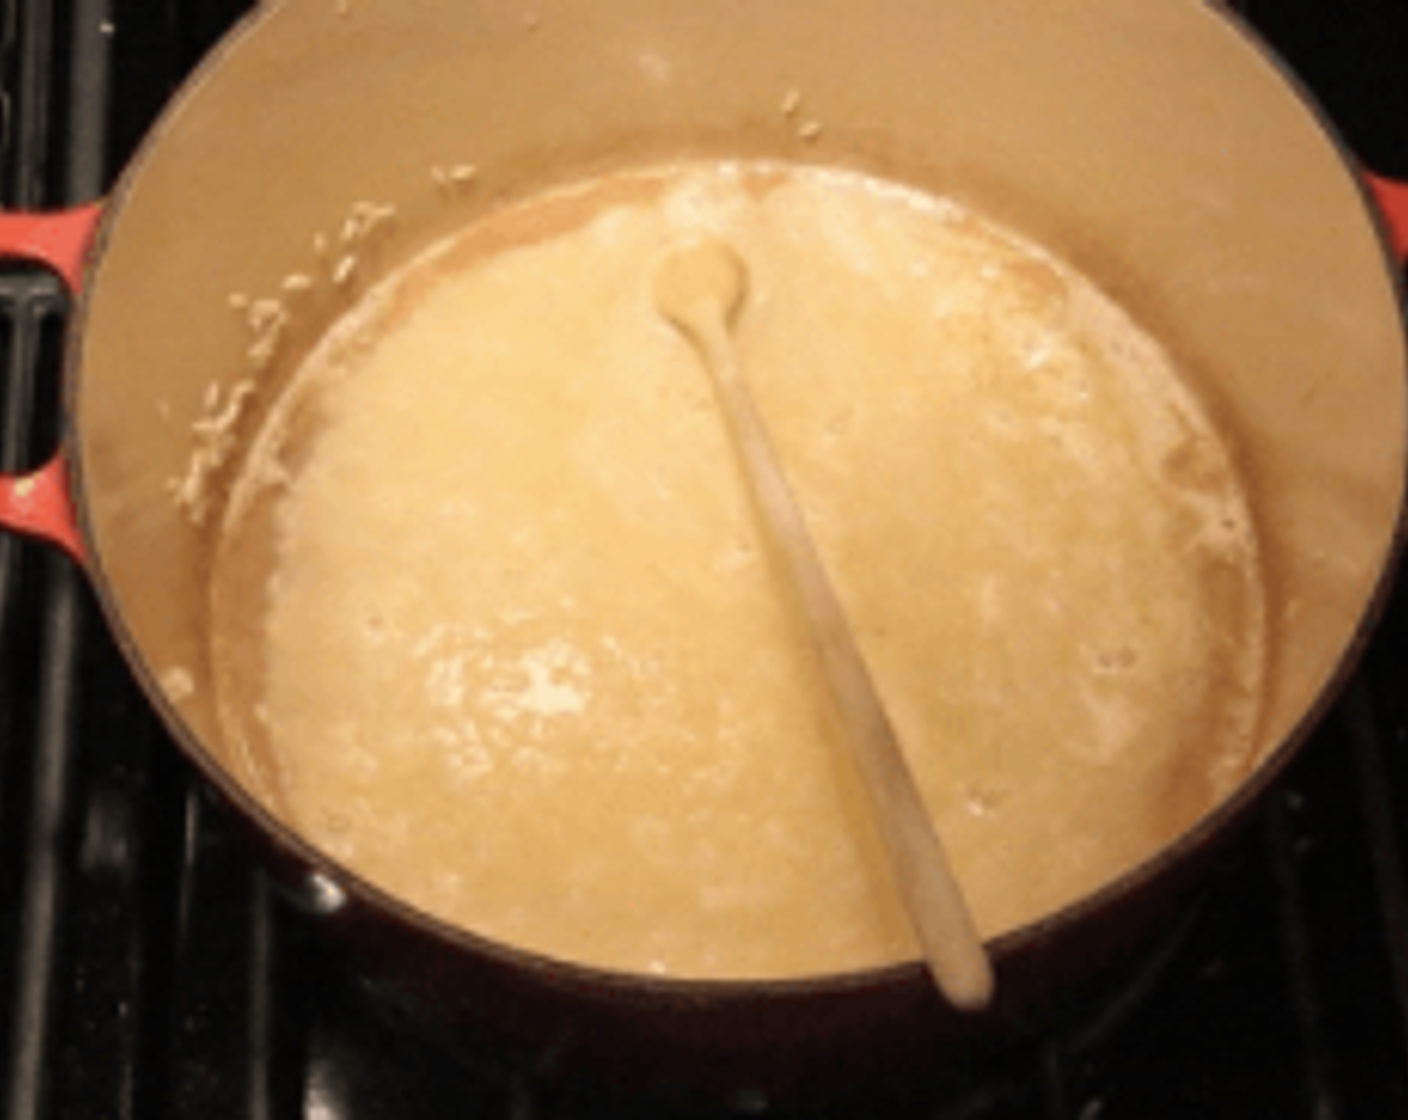 step 3 Add the Eggnog (2 cups), Granulated Sugar (1/2 cup), Salt (1/4 tsp) and Vanilla Bean Pod (1). Cook this for 20 minutes, the rice should become creamy and stay suspended in through out the pudding rather than sinking to the bottom.